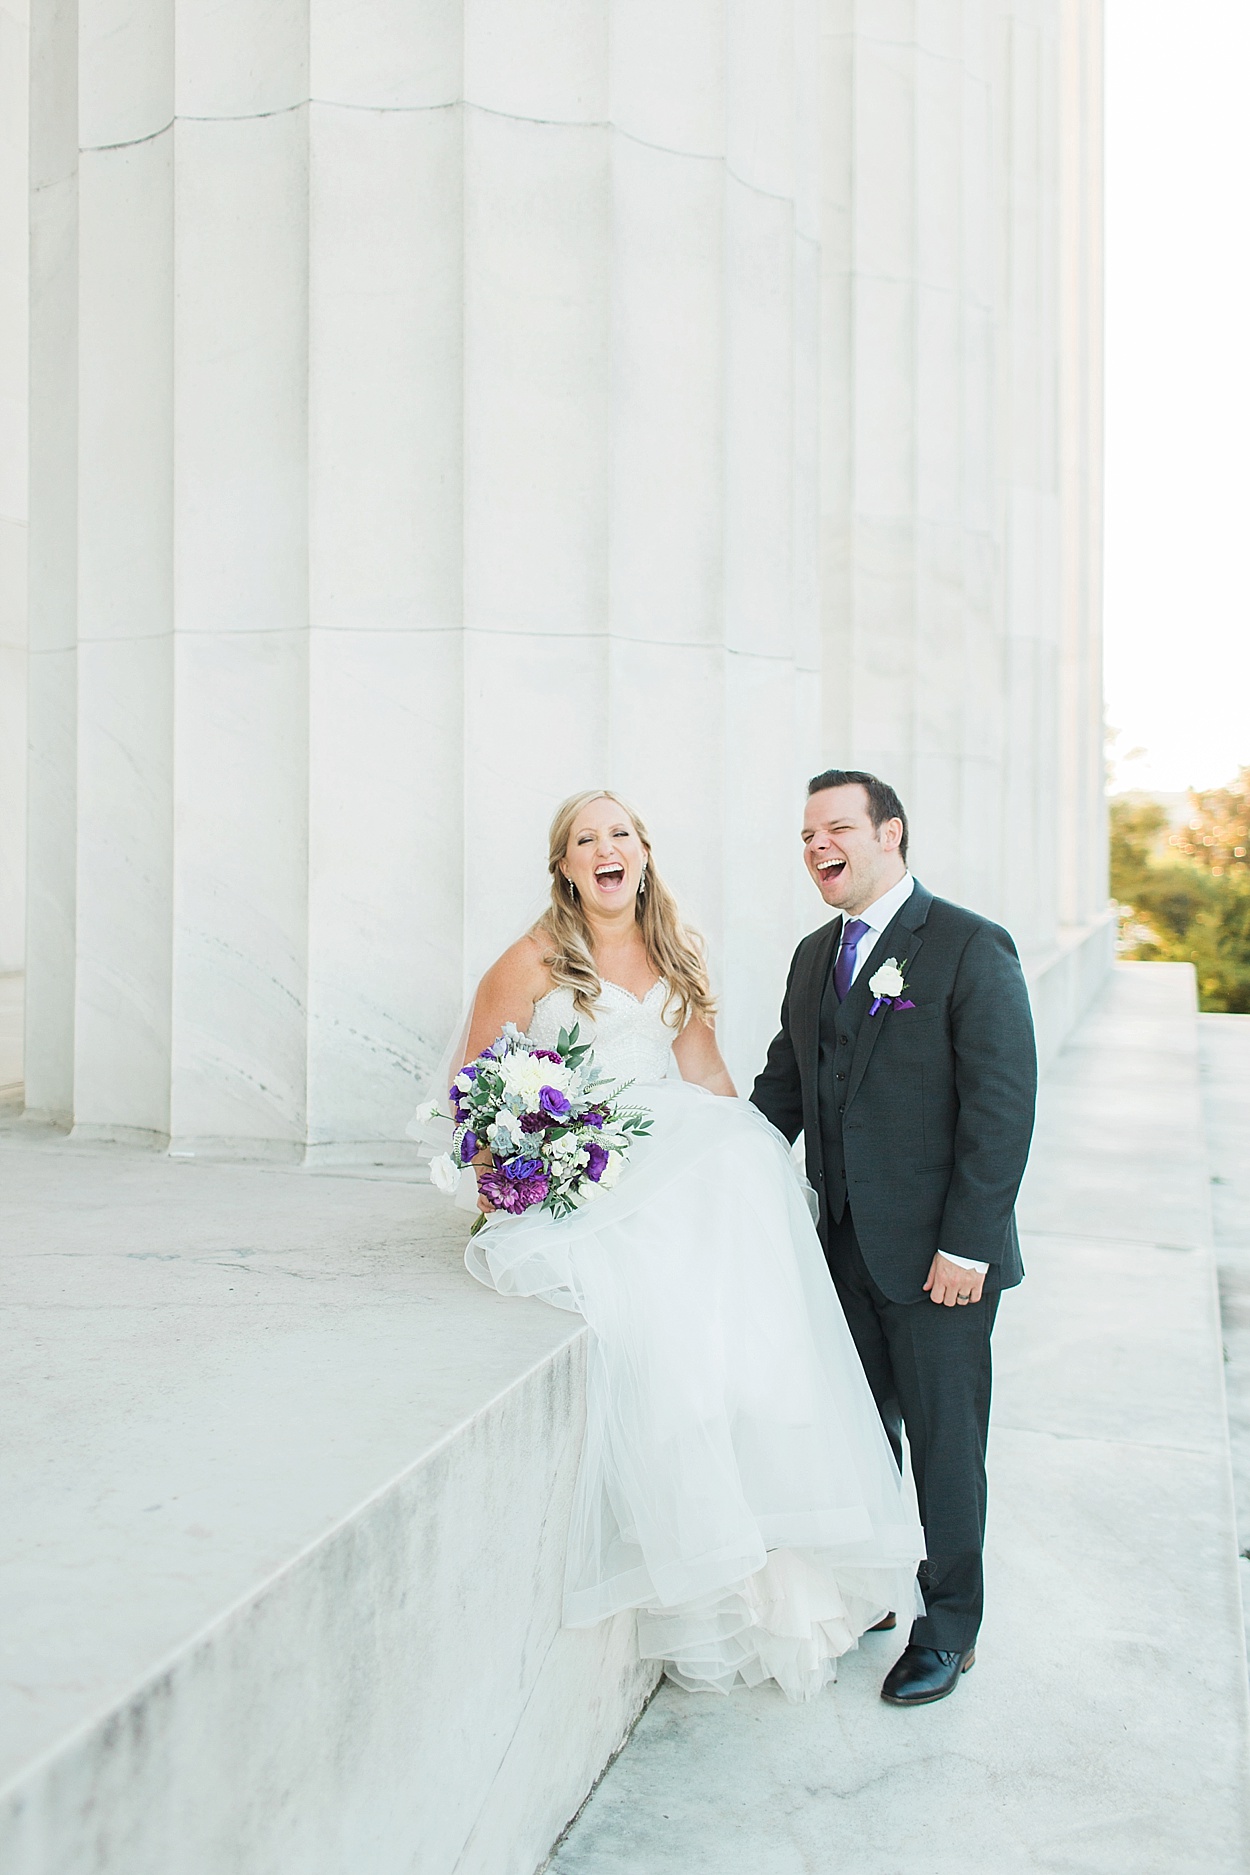 Fairmont Georgetown wedding with Grit & Grace | Abby Grace 